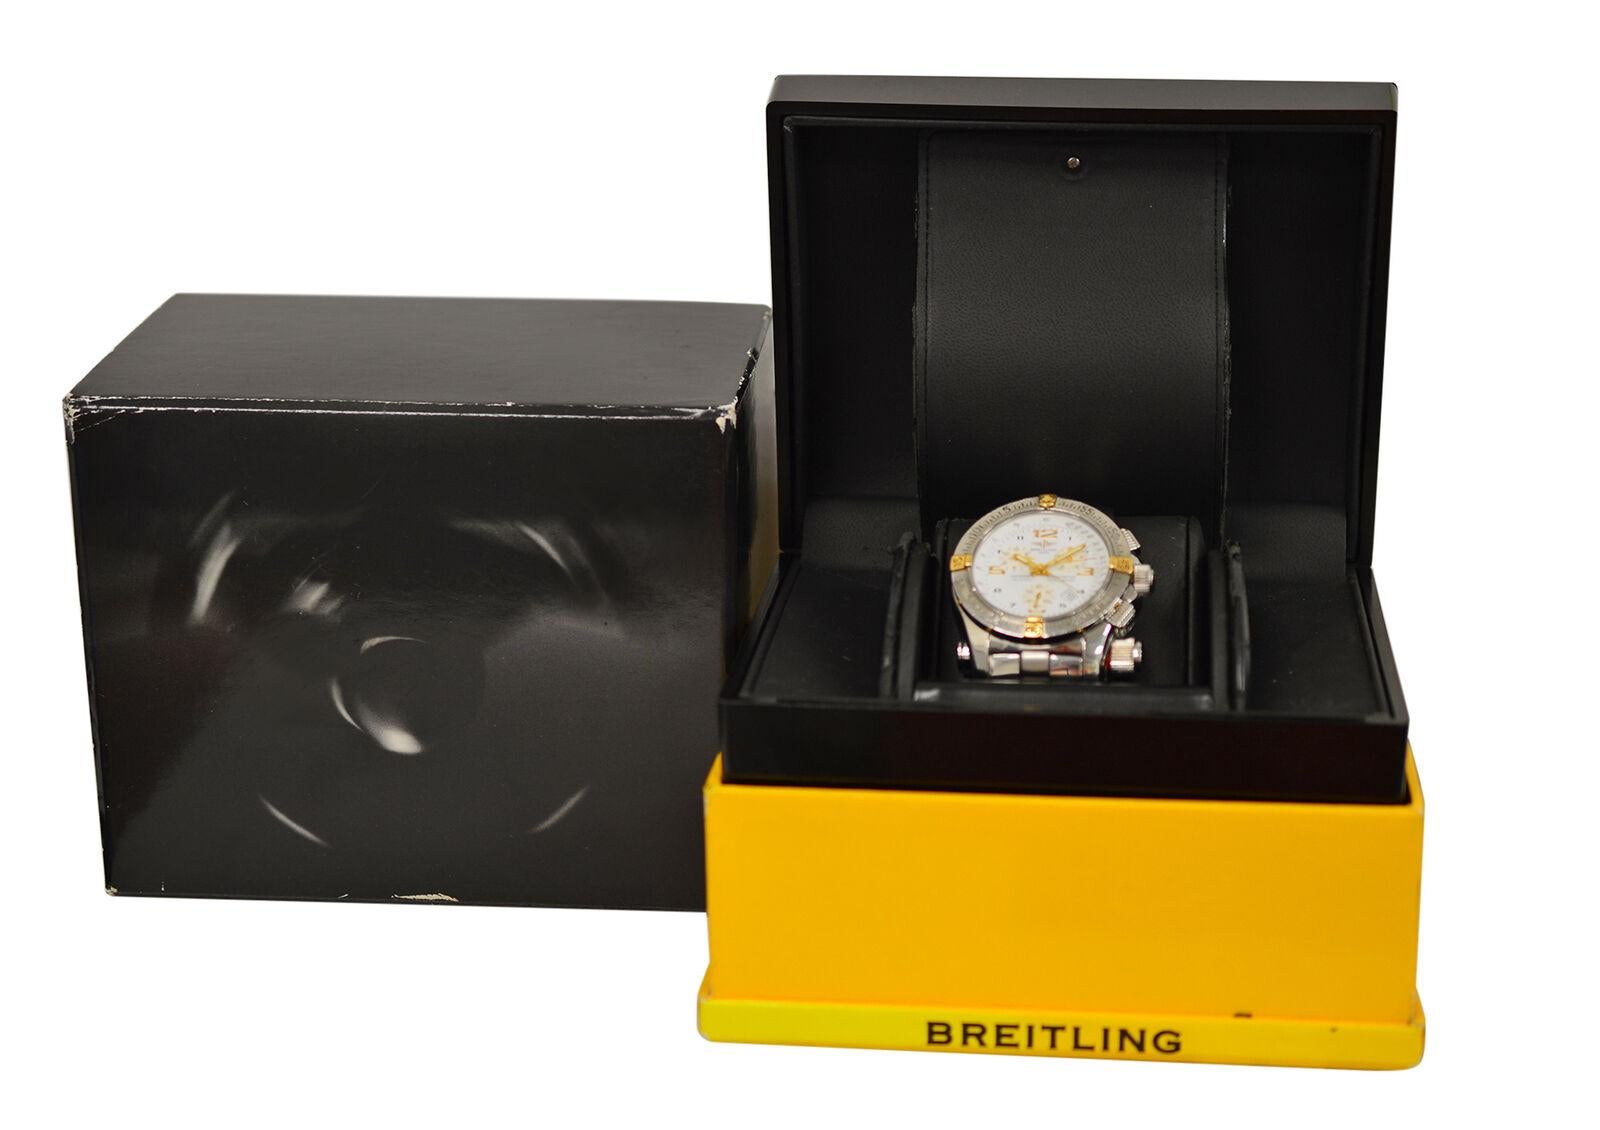 Brand	Breitling
Model	Emergency Mission Chronograph B73321
Gender	Men's
Condition	Pre-owned
Movement	Swiss Quartz 
Case Material	Stainless Steel
Bracelet / Strap Material	
Stainless Steel

Clasp / Buckle Material	
Stainless steel	
Clasp